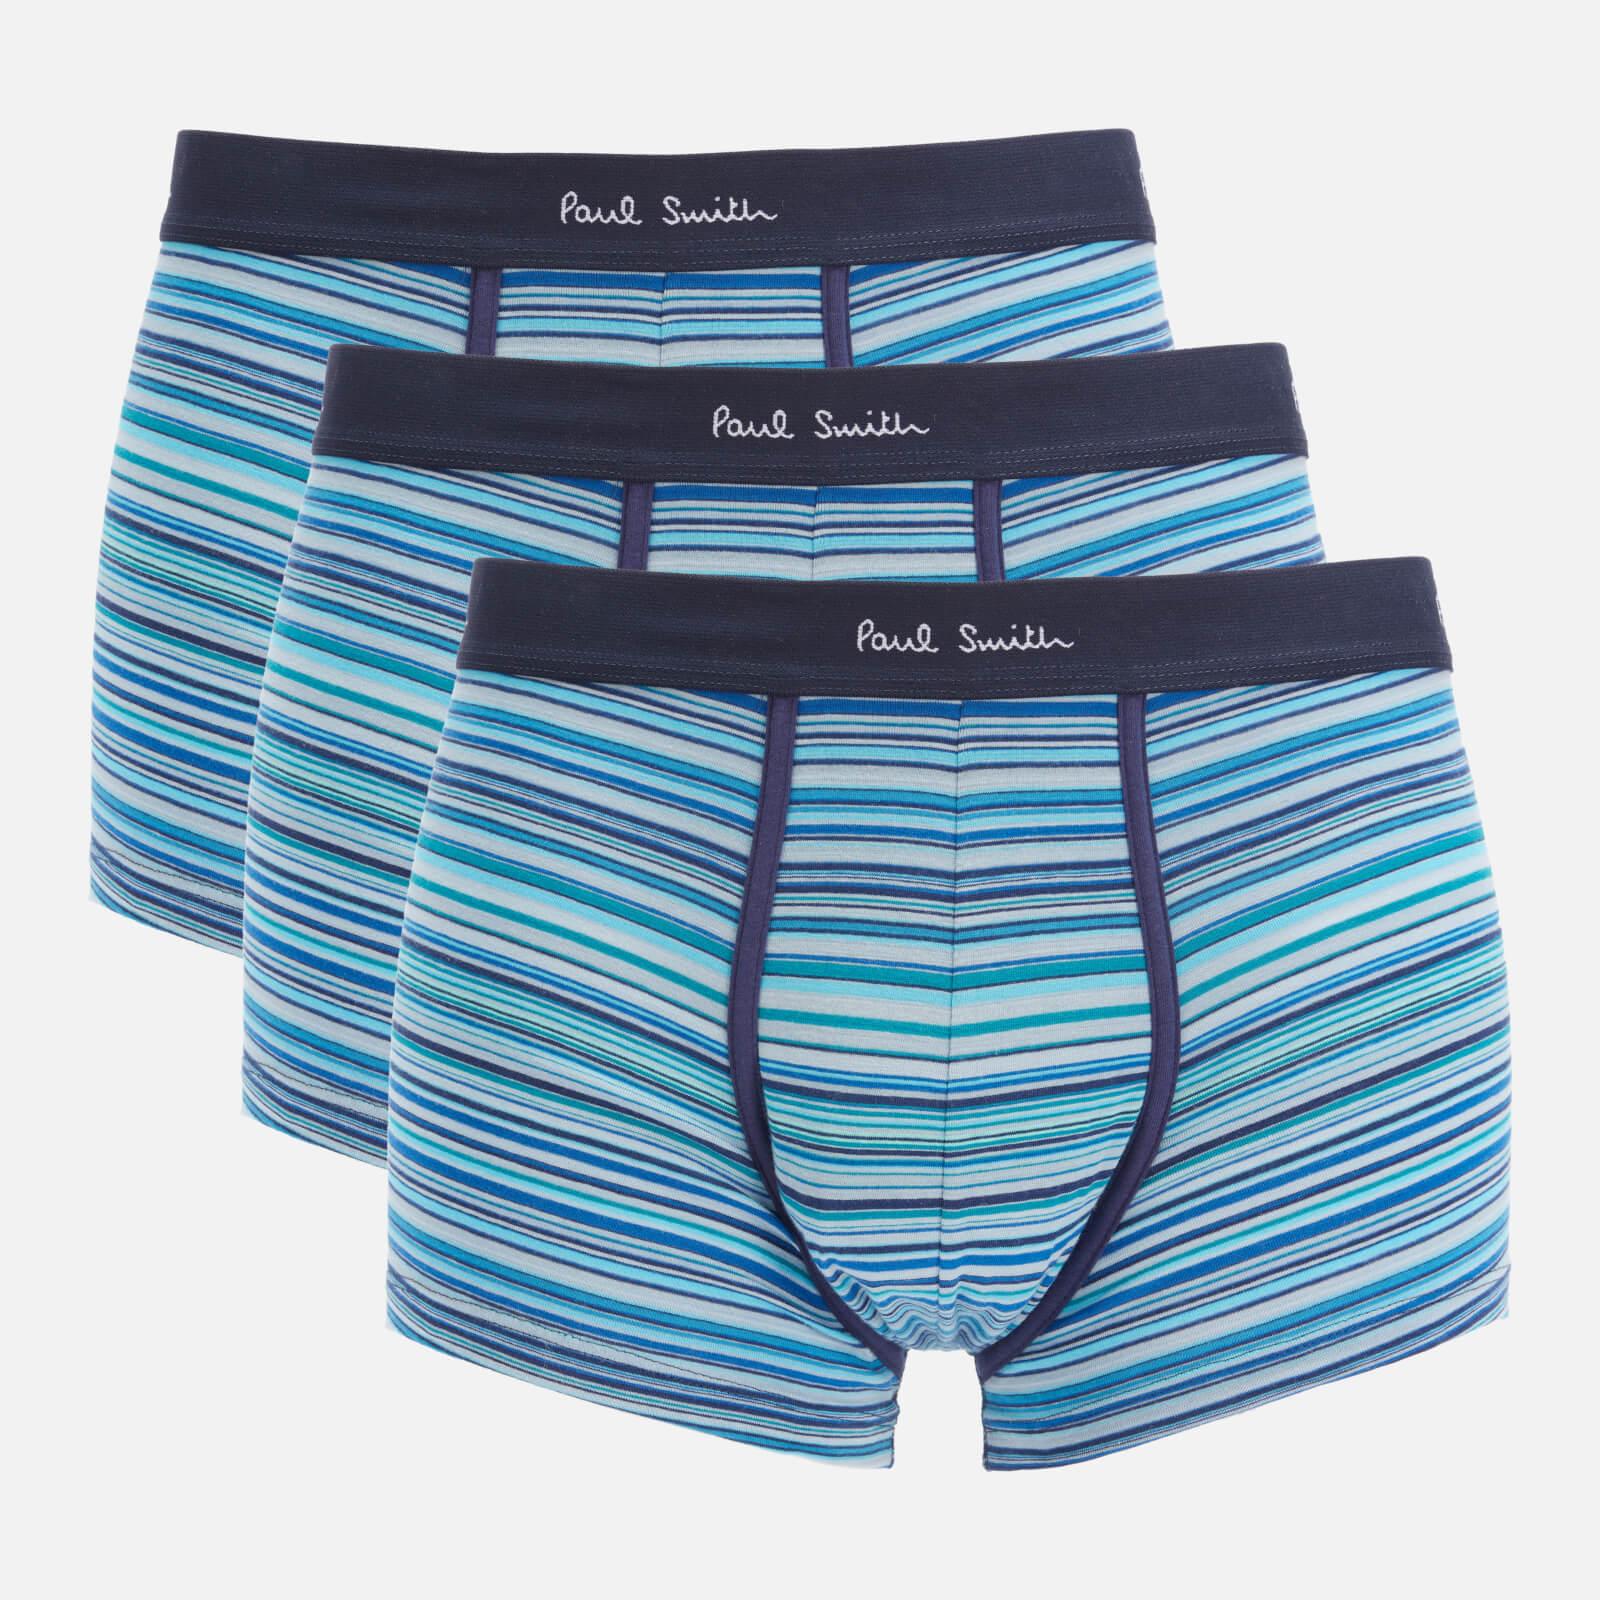 PS by Paul Smith Cotton 3 Pack Boxer Briefs in Blue for Men - Lyst